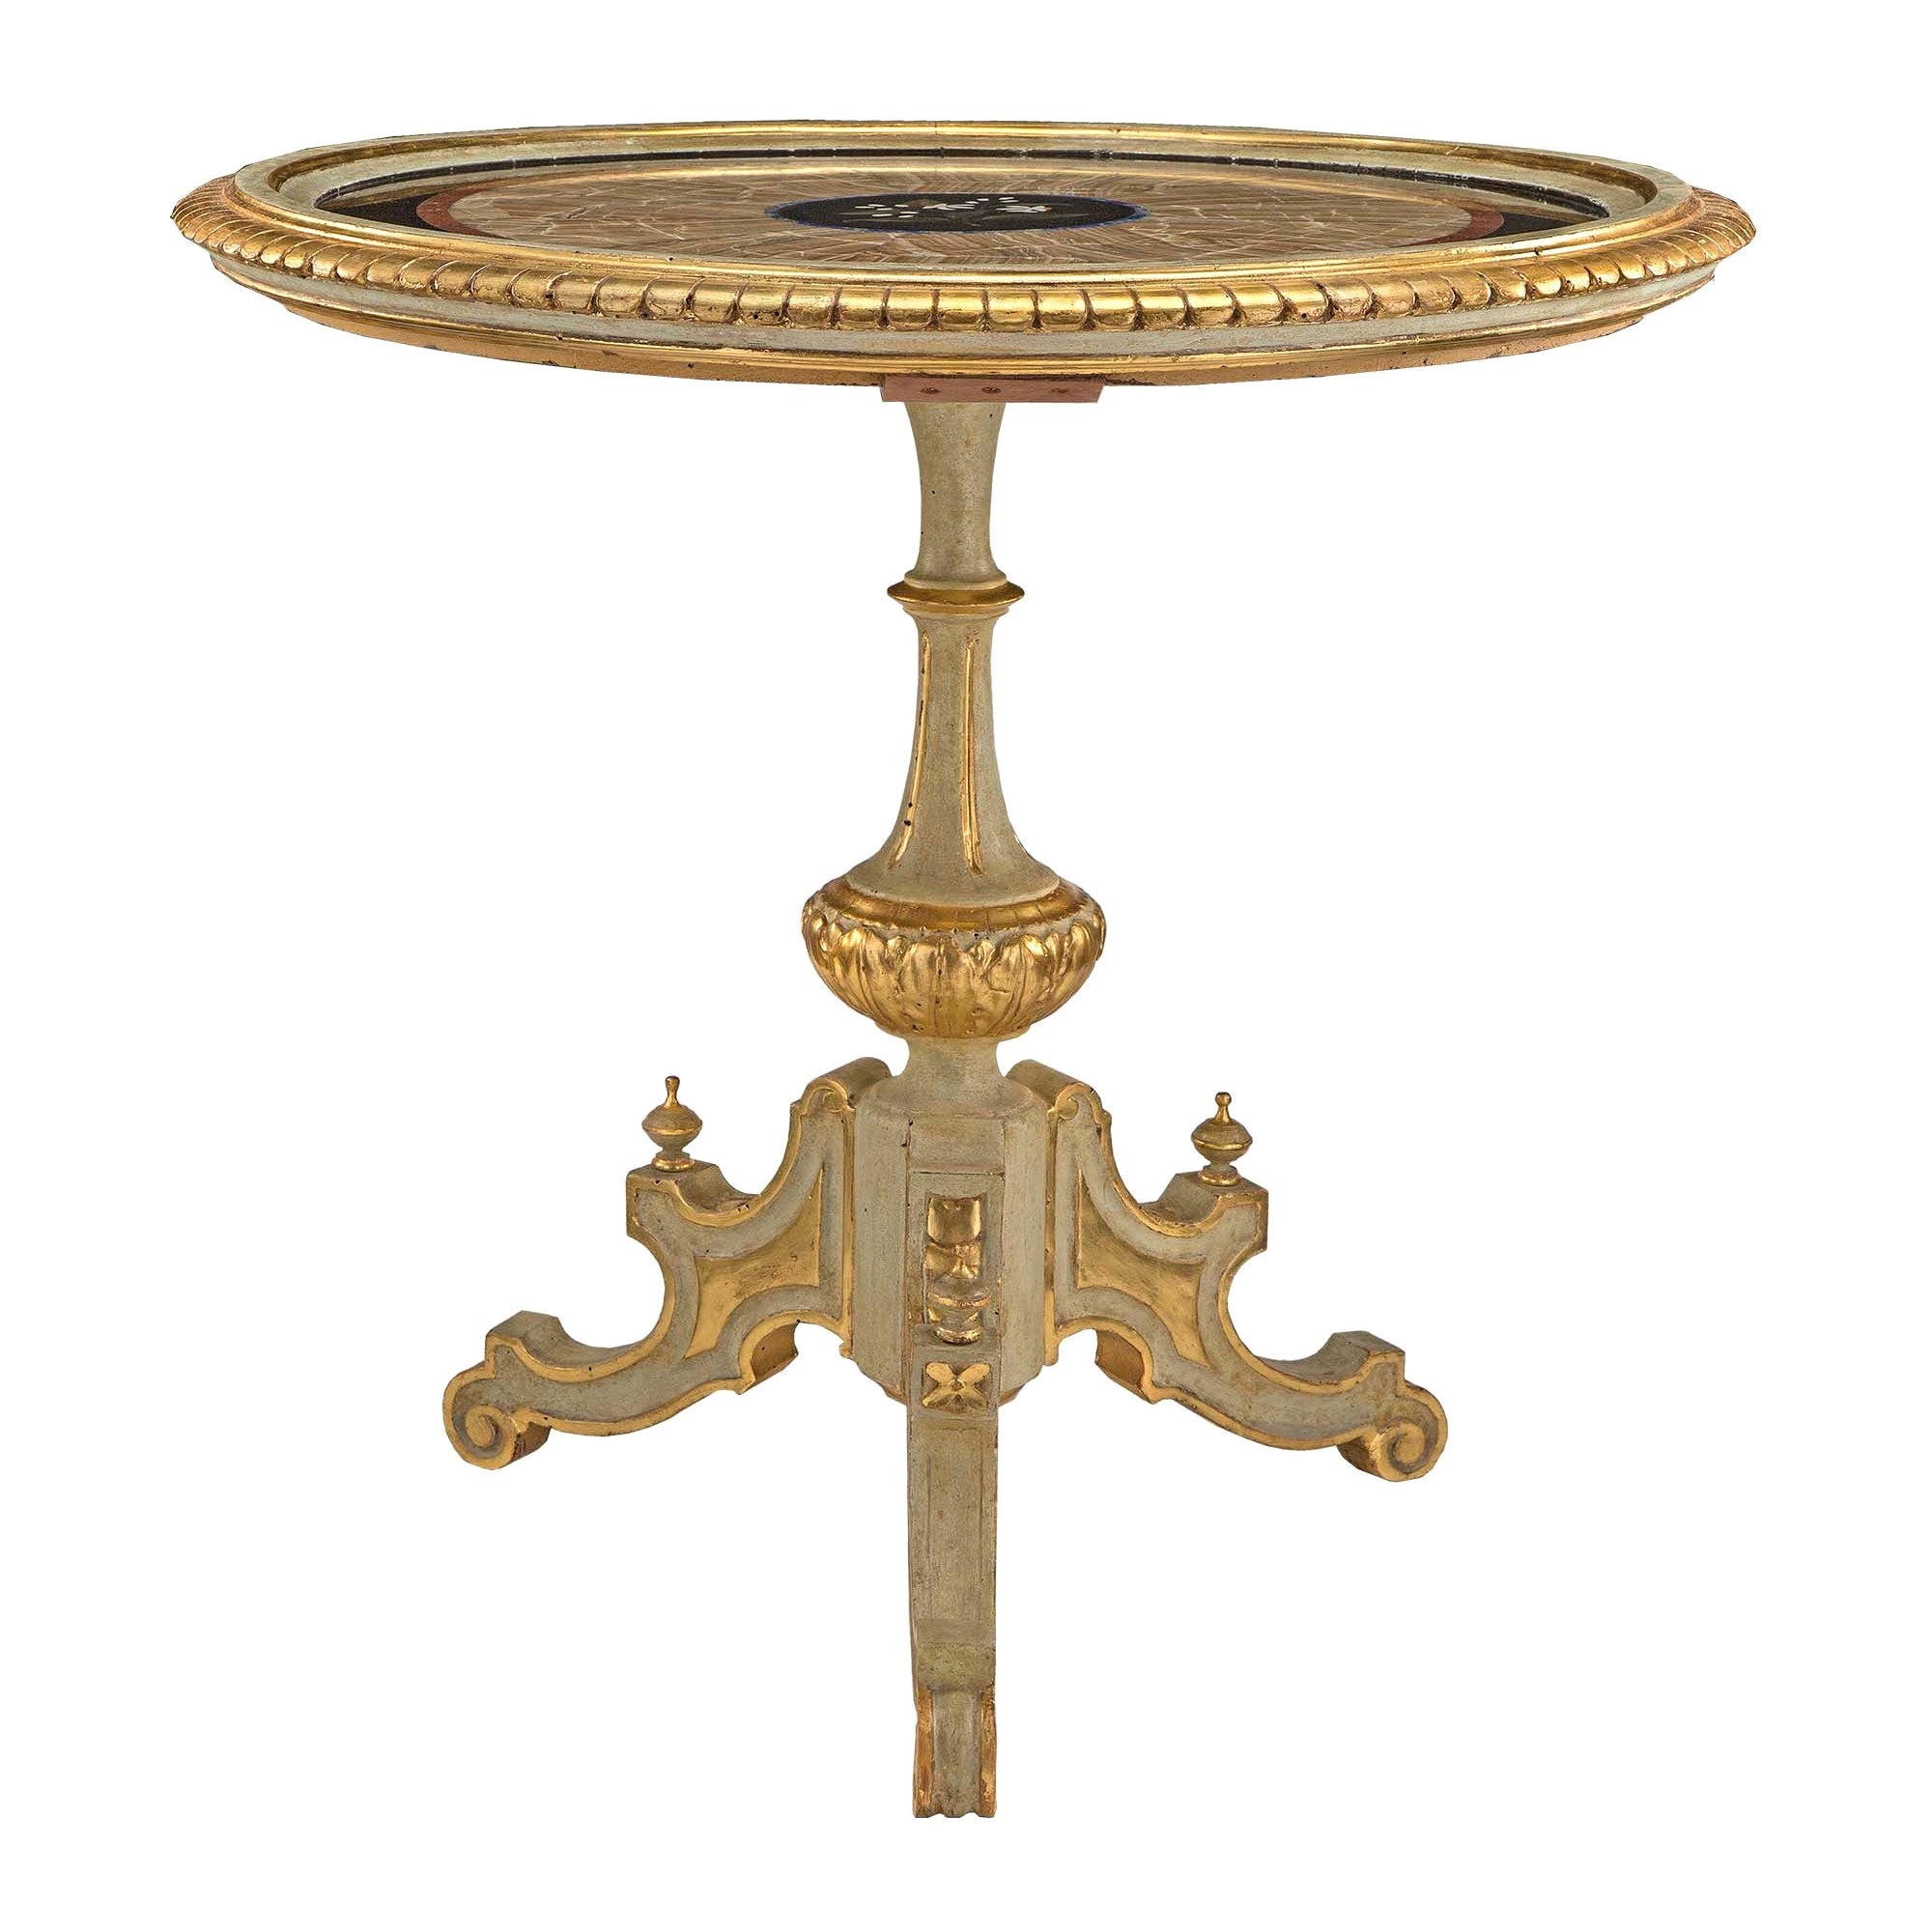 Italian Early 19th Century Giltwood, Onyx and Marble Florentine Side Table For Sale